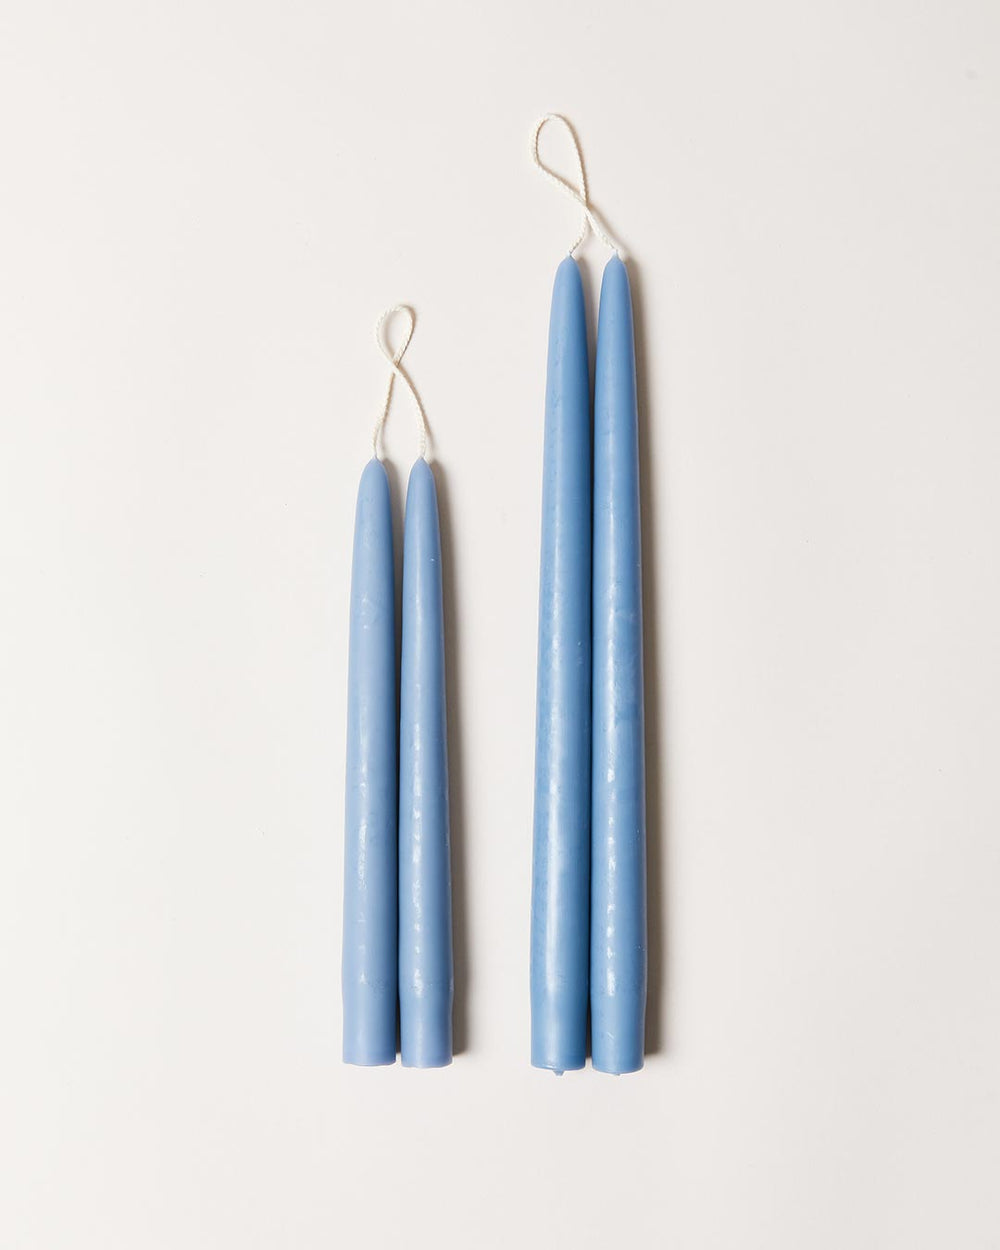 Taper Candles - Blues + Greys